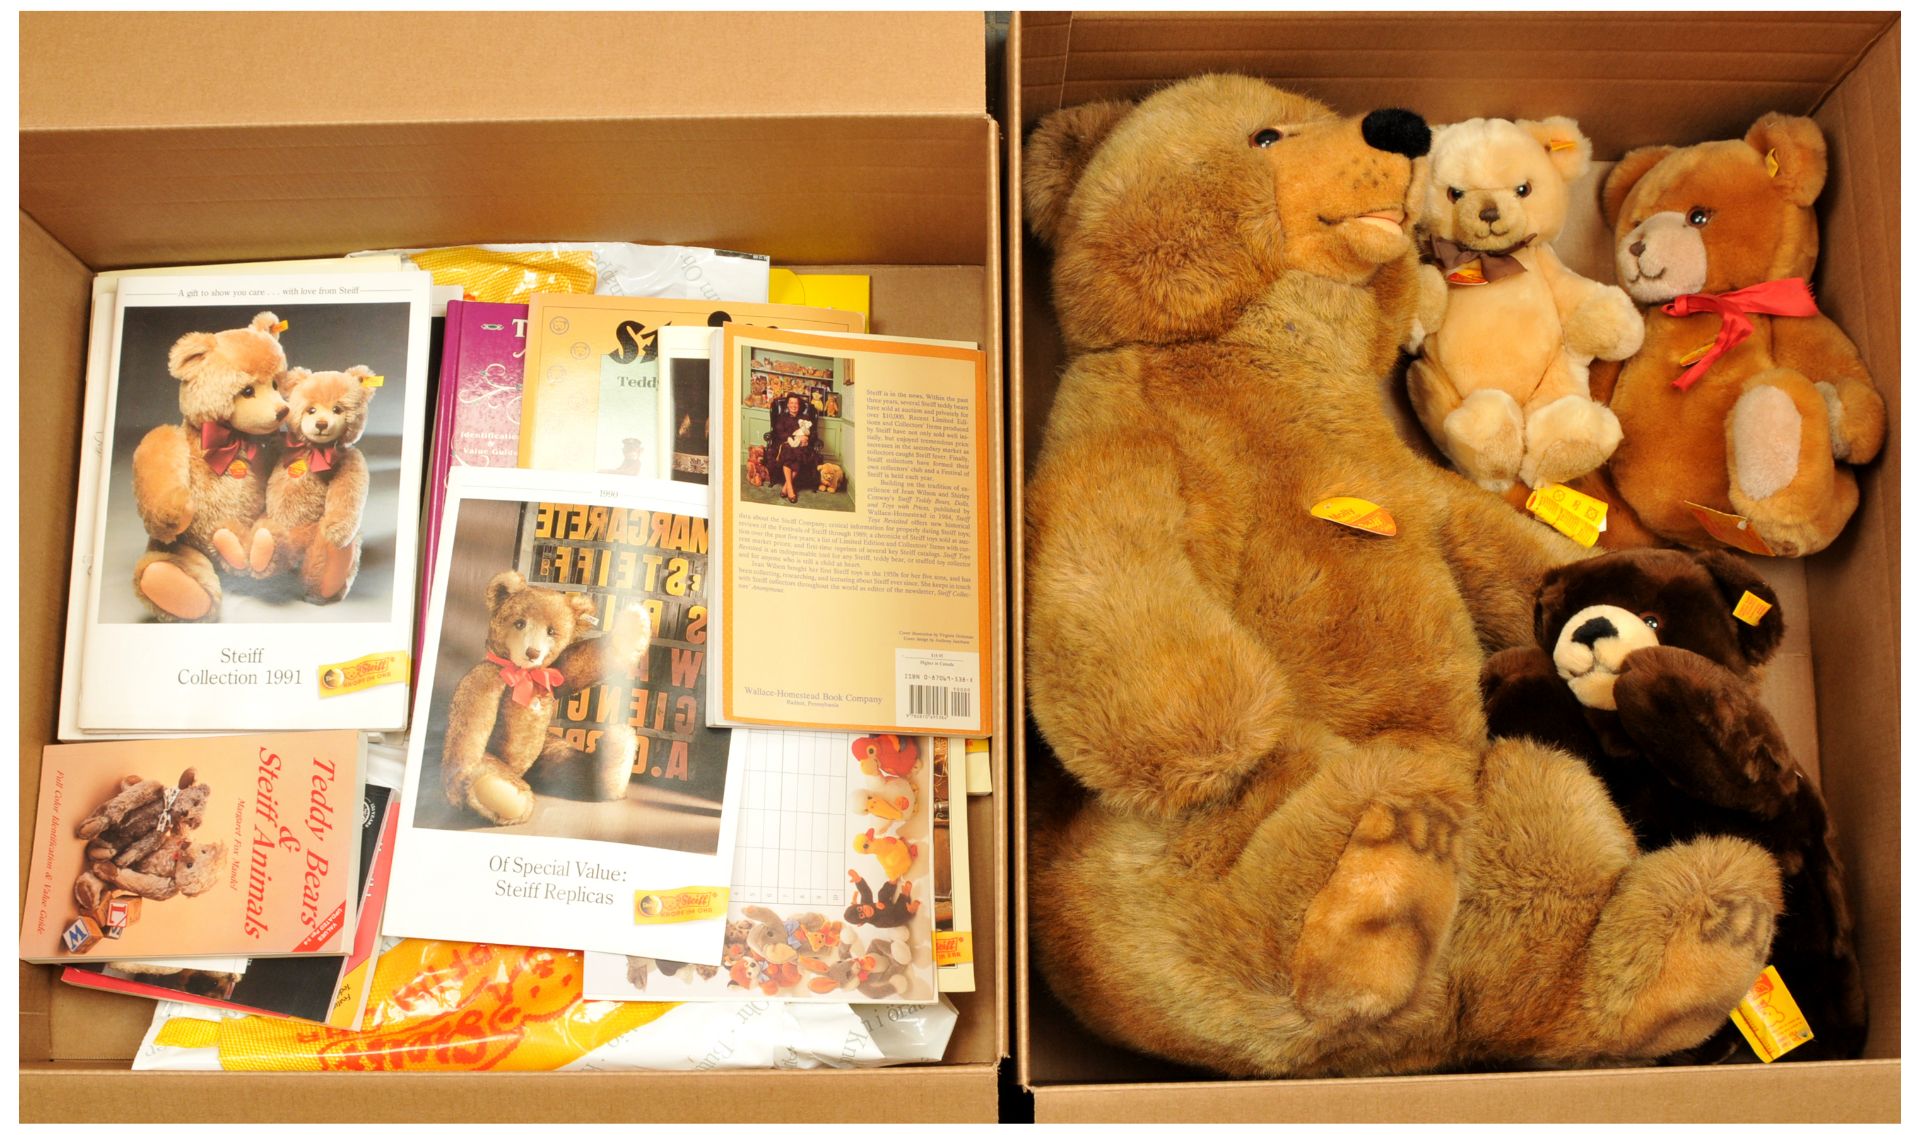 Steiff assortment of bears, plus collection of teddy bear-related books